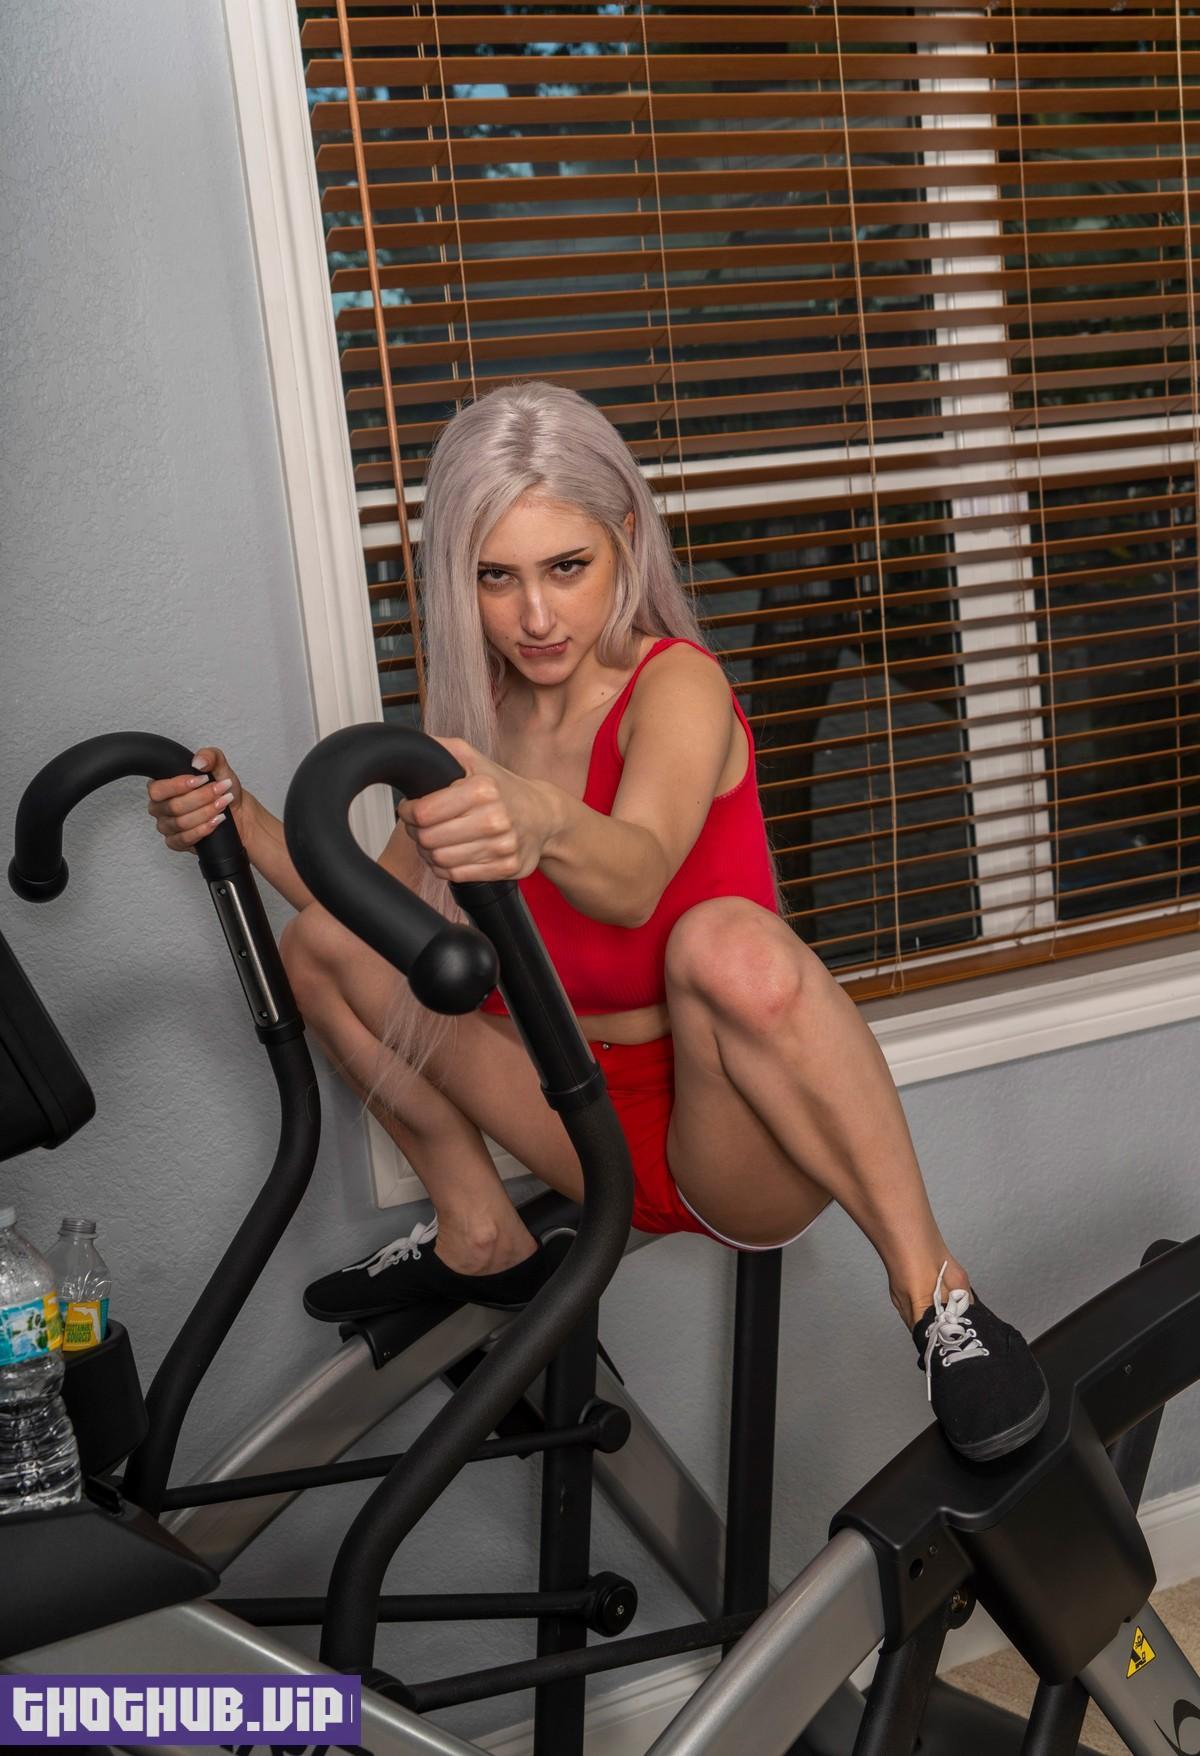 Skylar Vox TheFappening Nude Workout 49 Photos